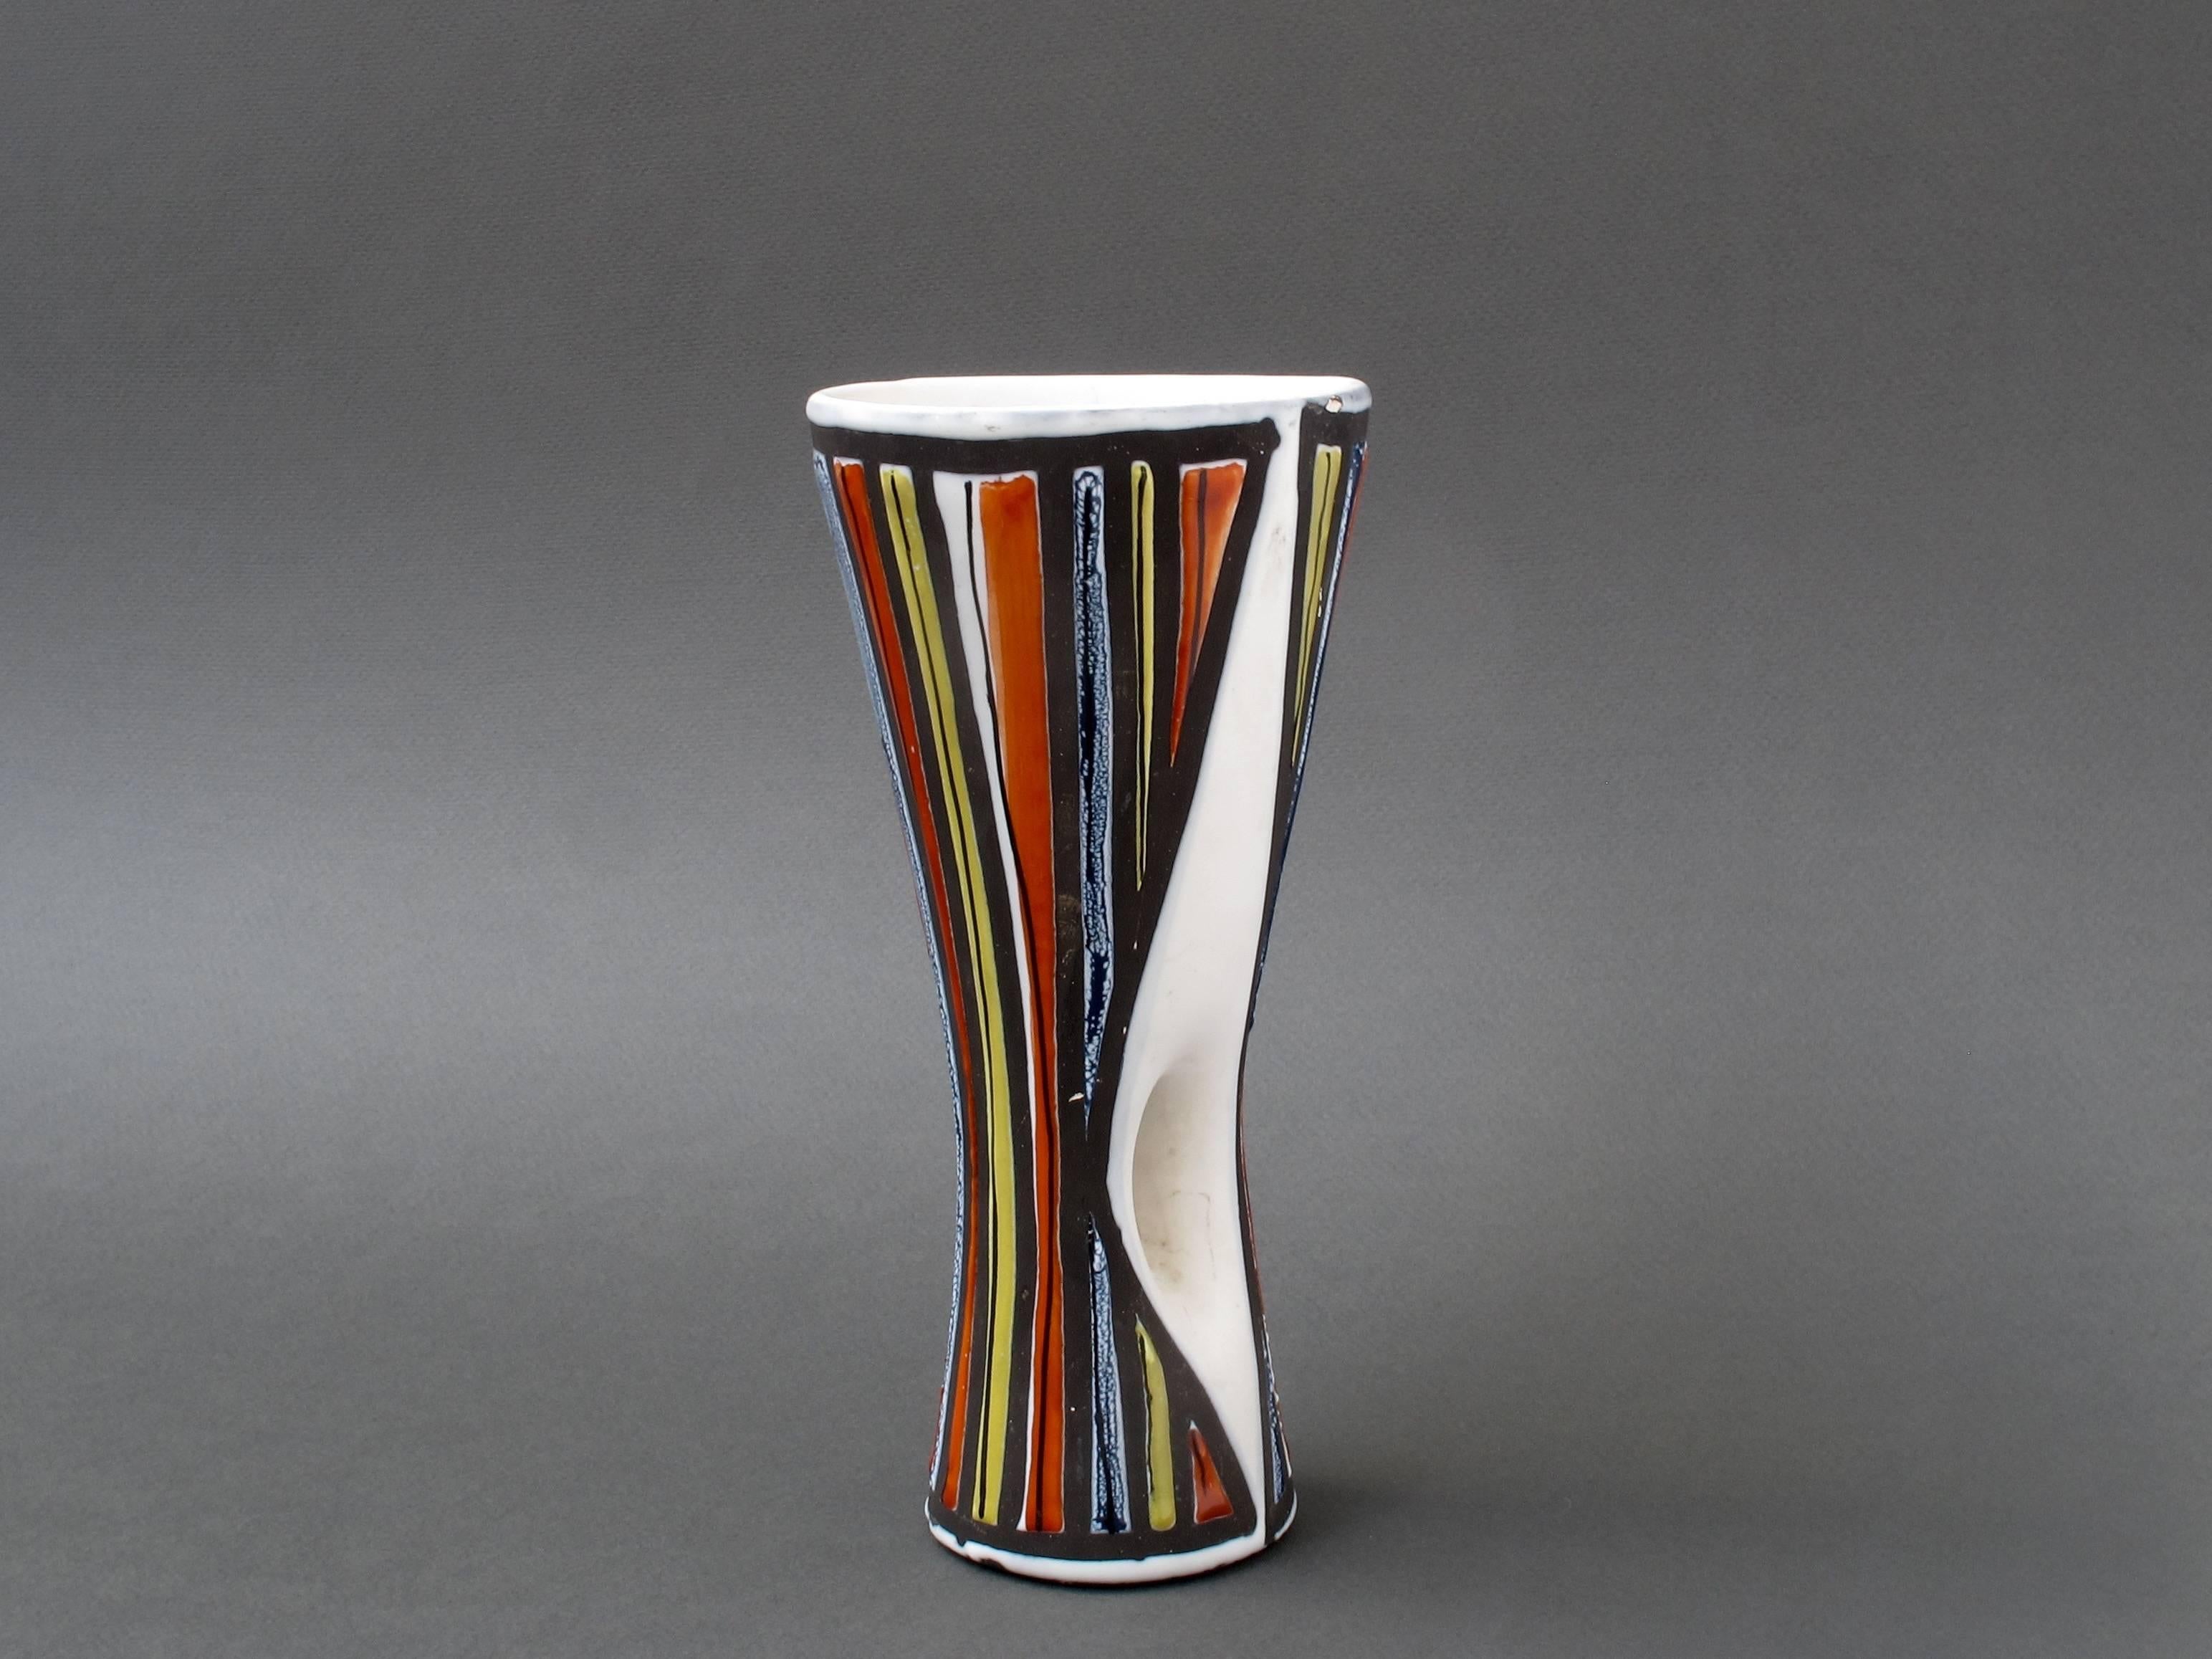 A stylised vase (1950s) by ceramicist Roger Capron (Sept 1922 - Nov 2006) who founded the craft-based workshop in Vallauris, France, l'Atelier Callis, where his creations contributed to a veritable renaissance of pottery and ceramics. Capron left